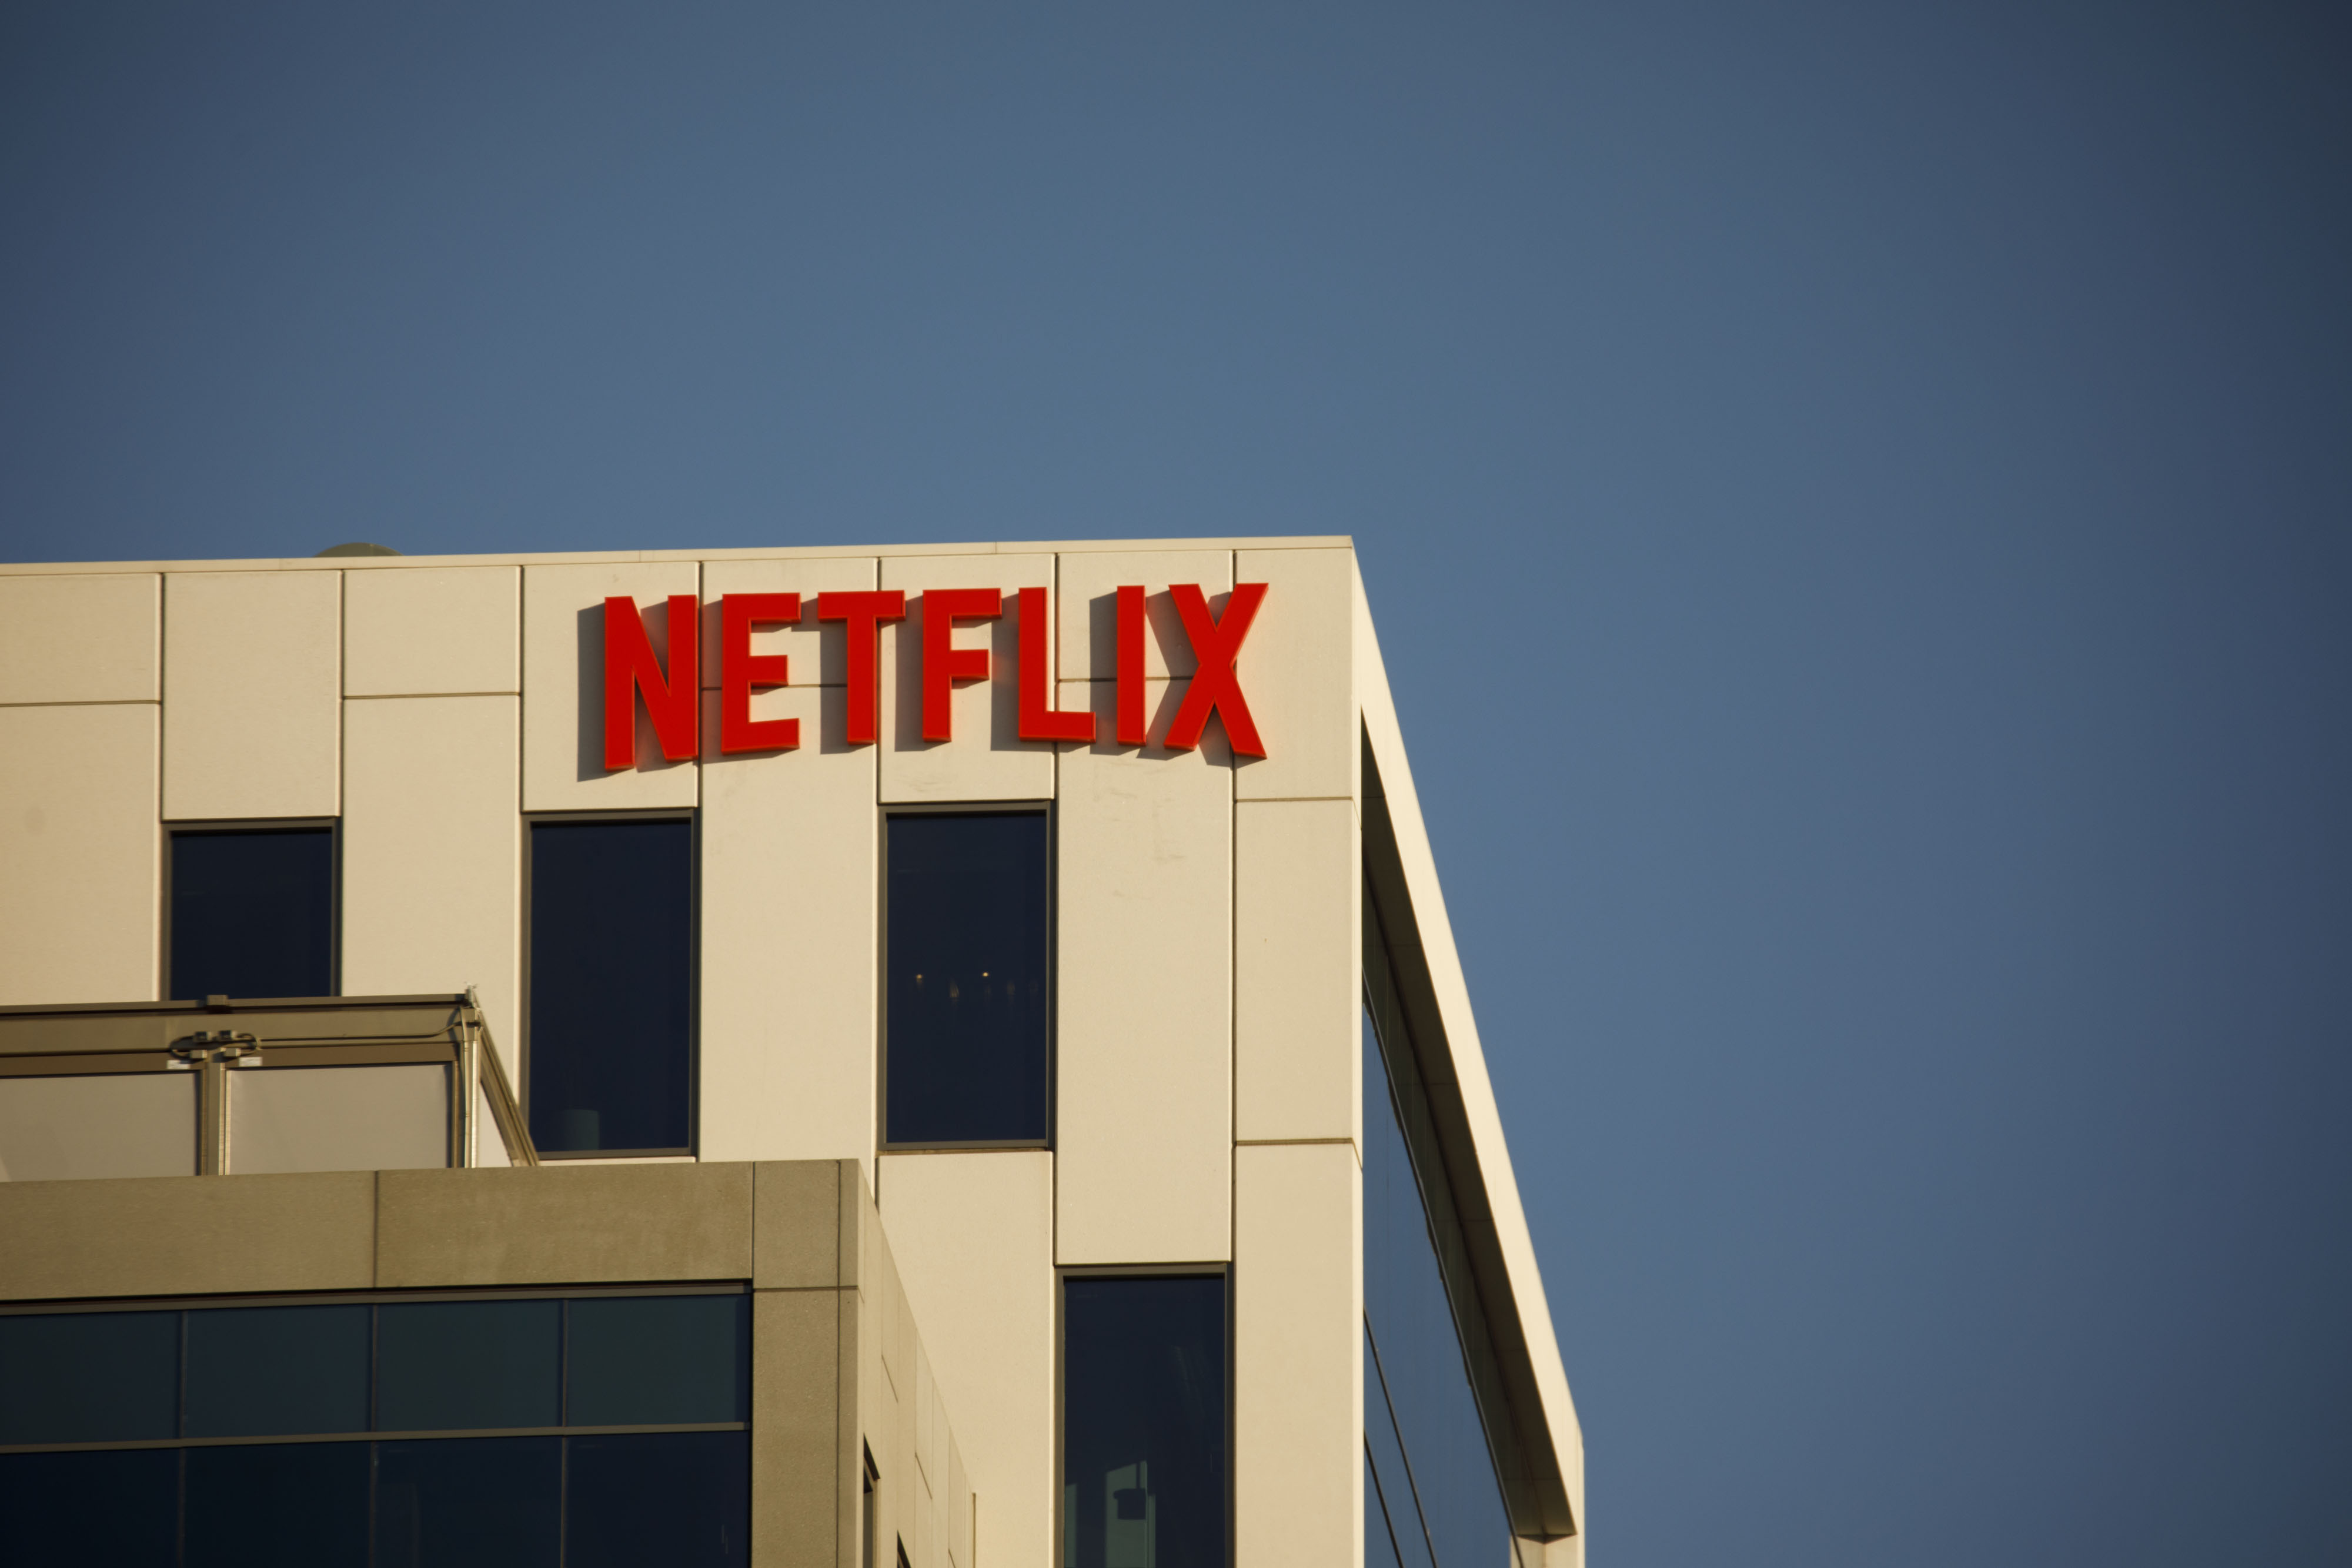 Vietnam Says Netflix Removes Show Violating Sovereignty Laws - Bloomberg